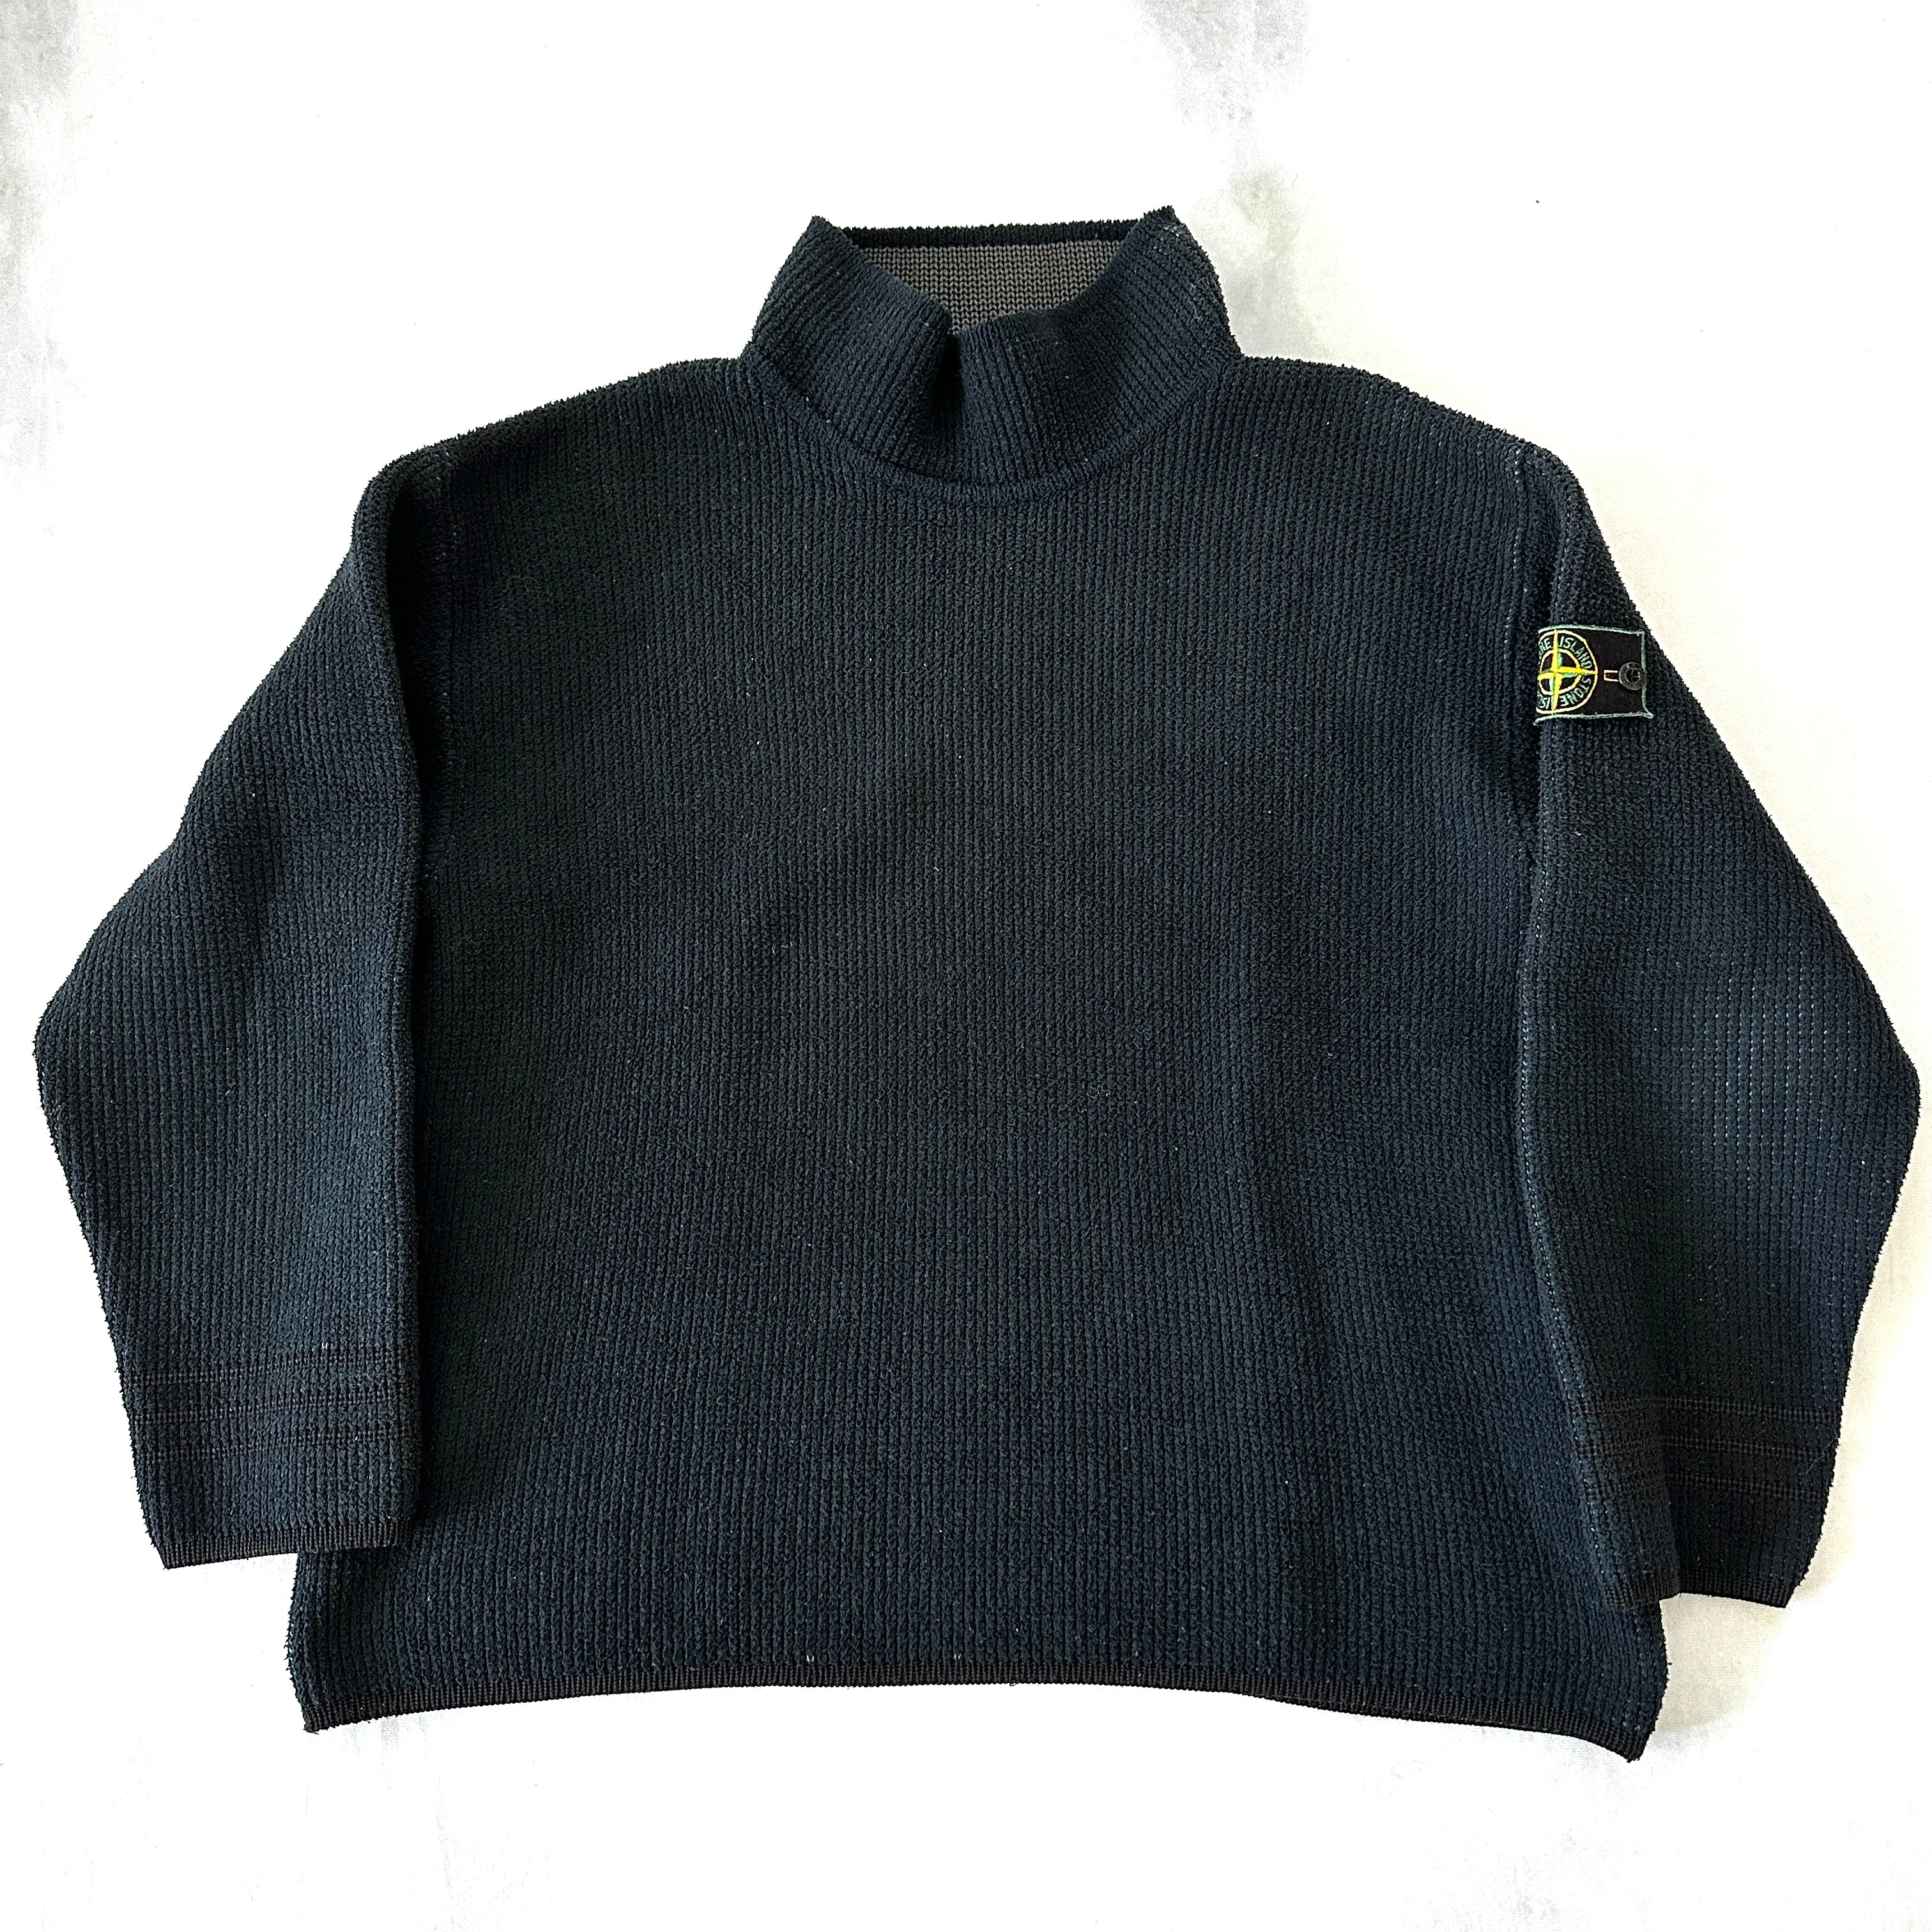 Stone Island 1998 Vintage Turtleneck Knit Sweater - XL - Made in 